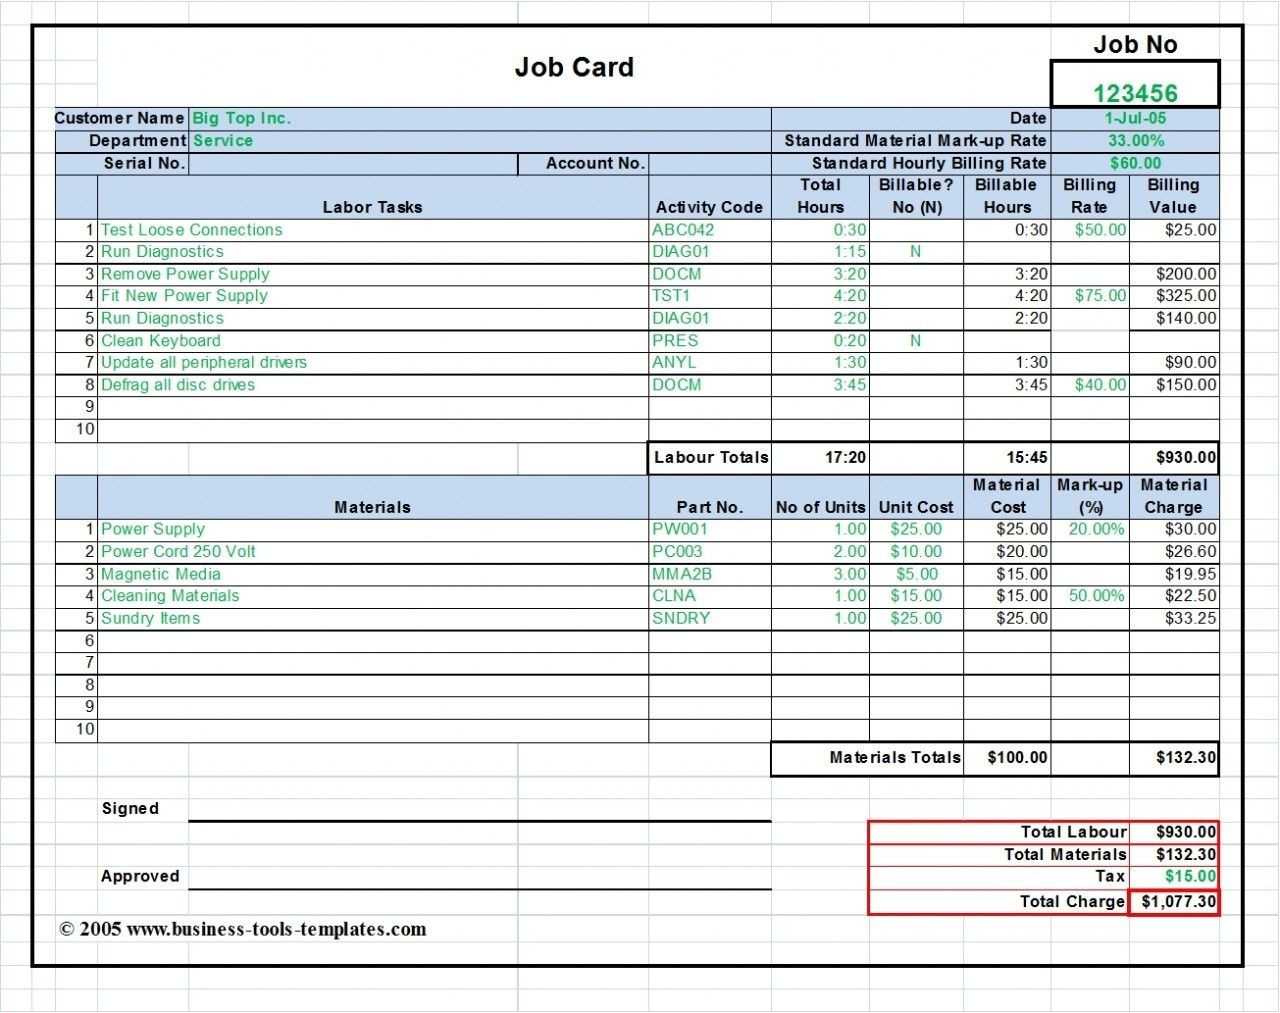 Workshop Job Card Template Excel, Labor & Material Cost Regarding Rate Card Template Word